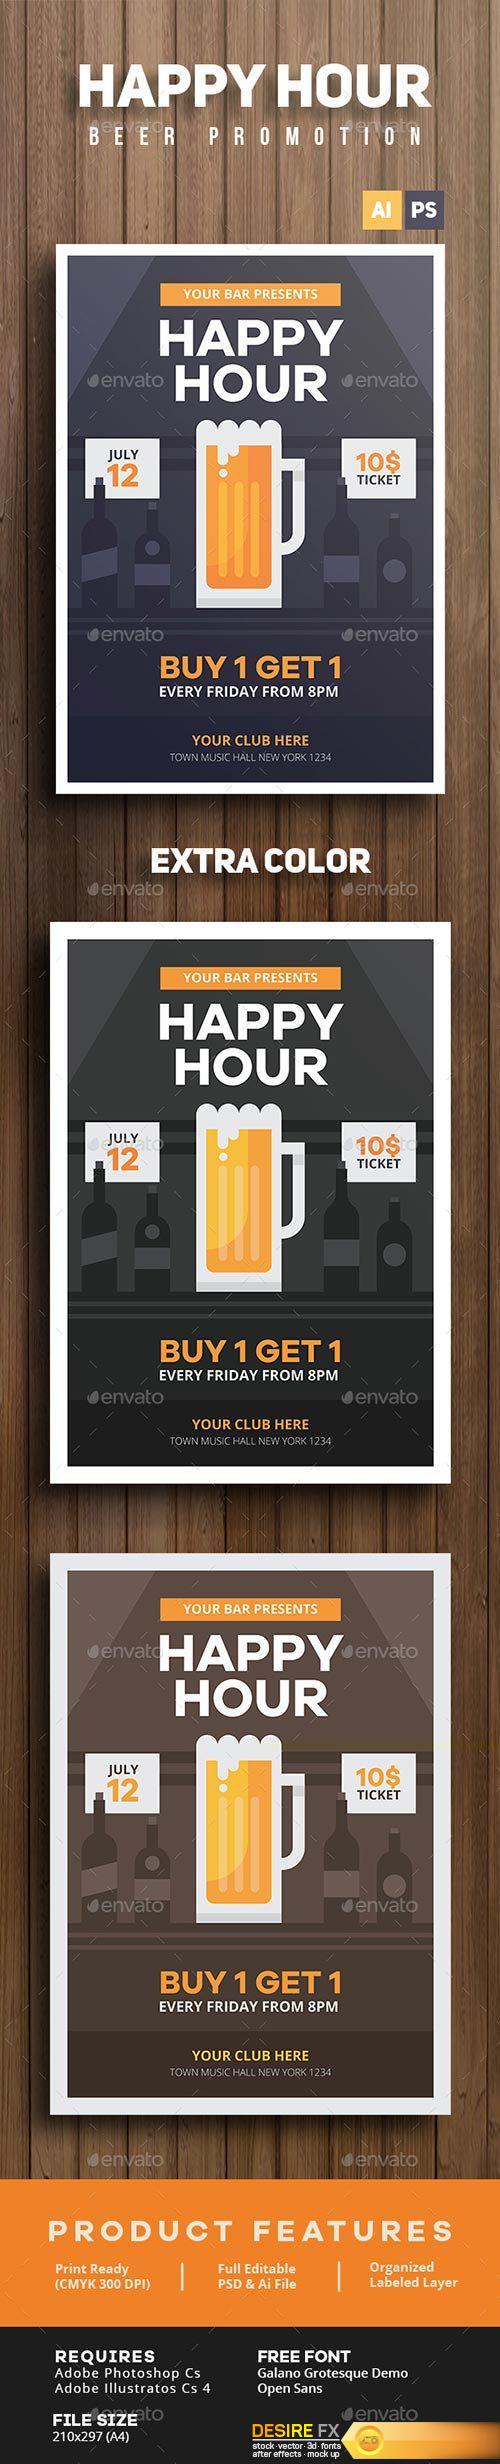 Graphicriver - Happy Hour Beer Promotion Flyer 14265779